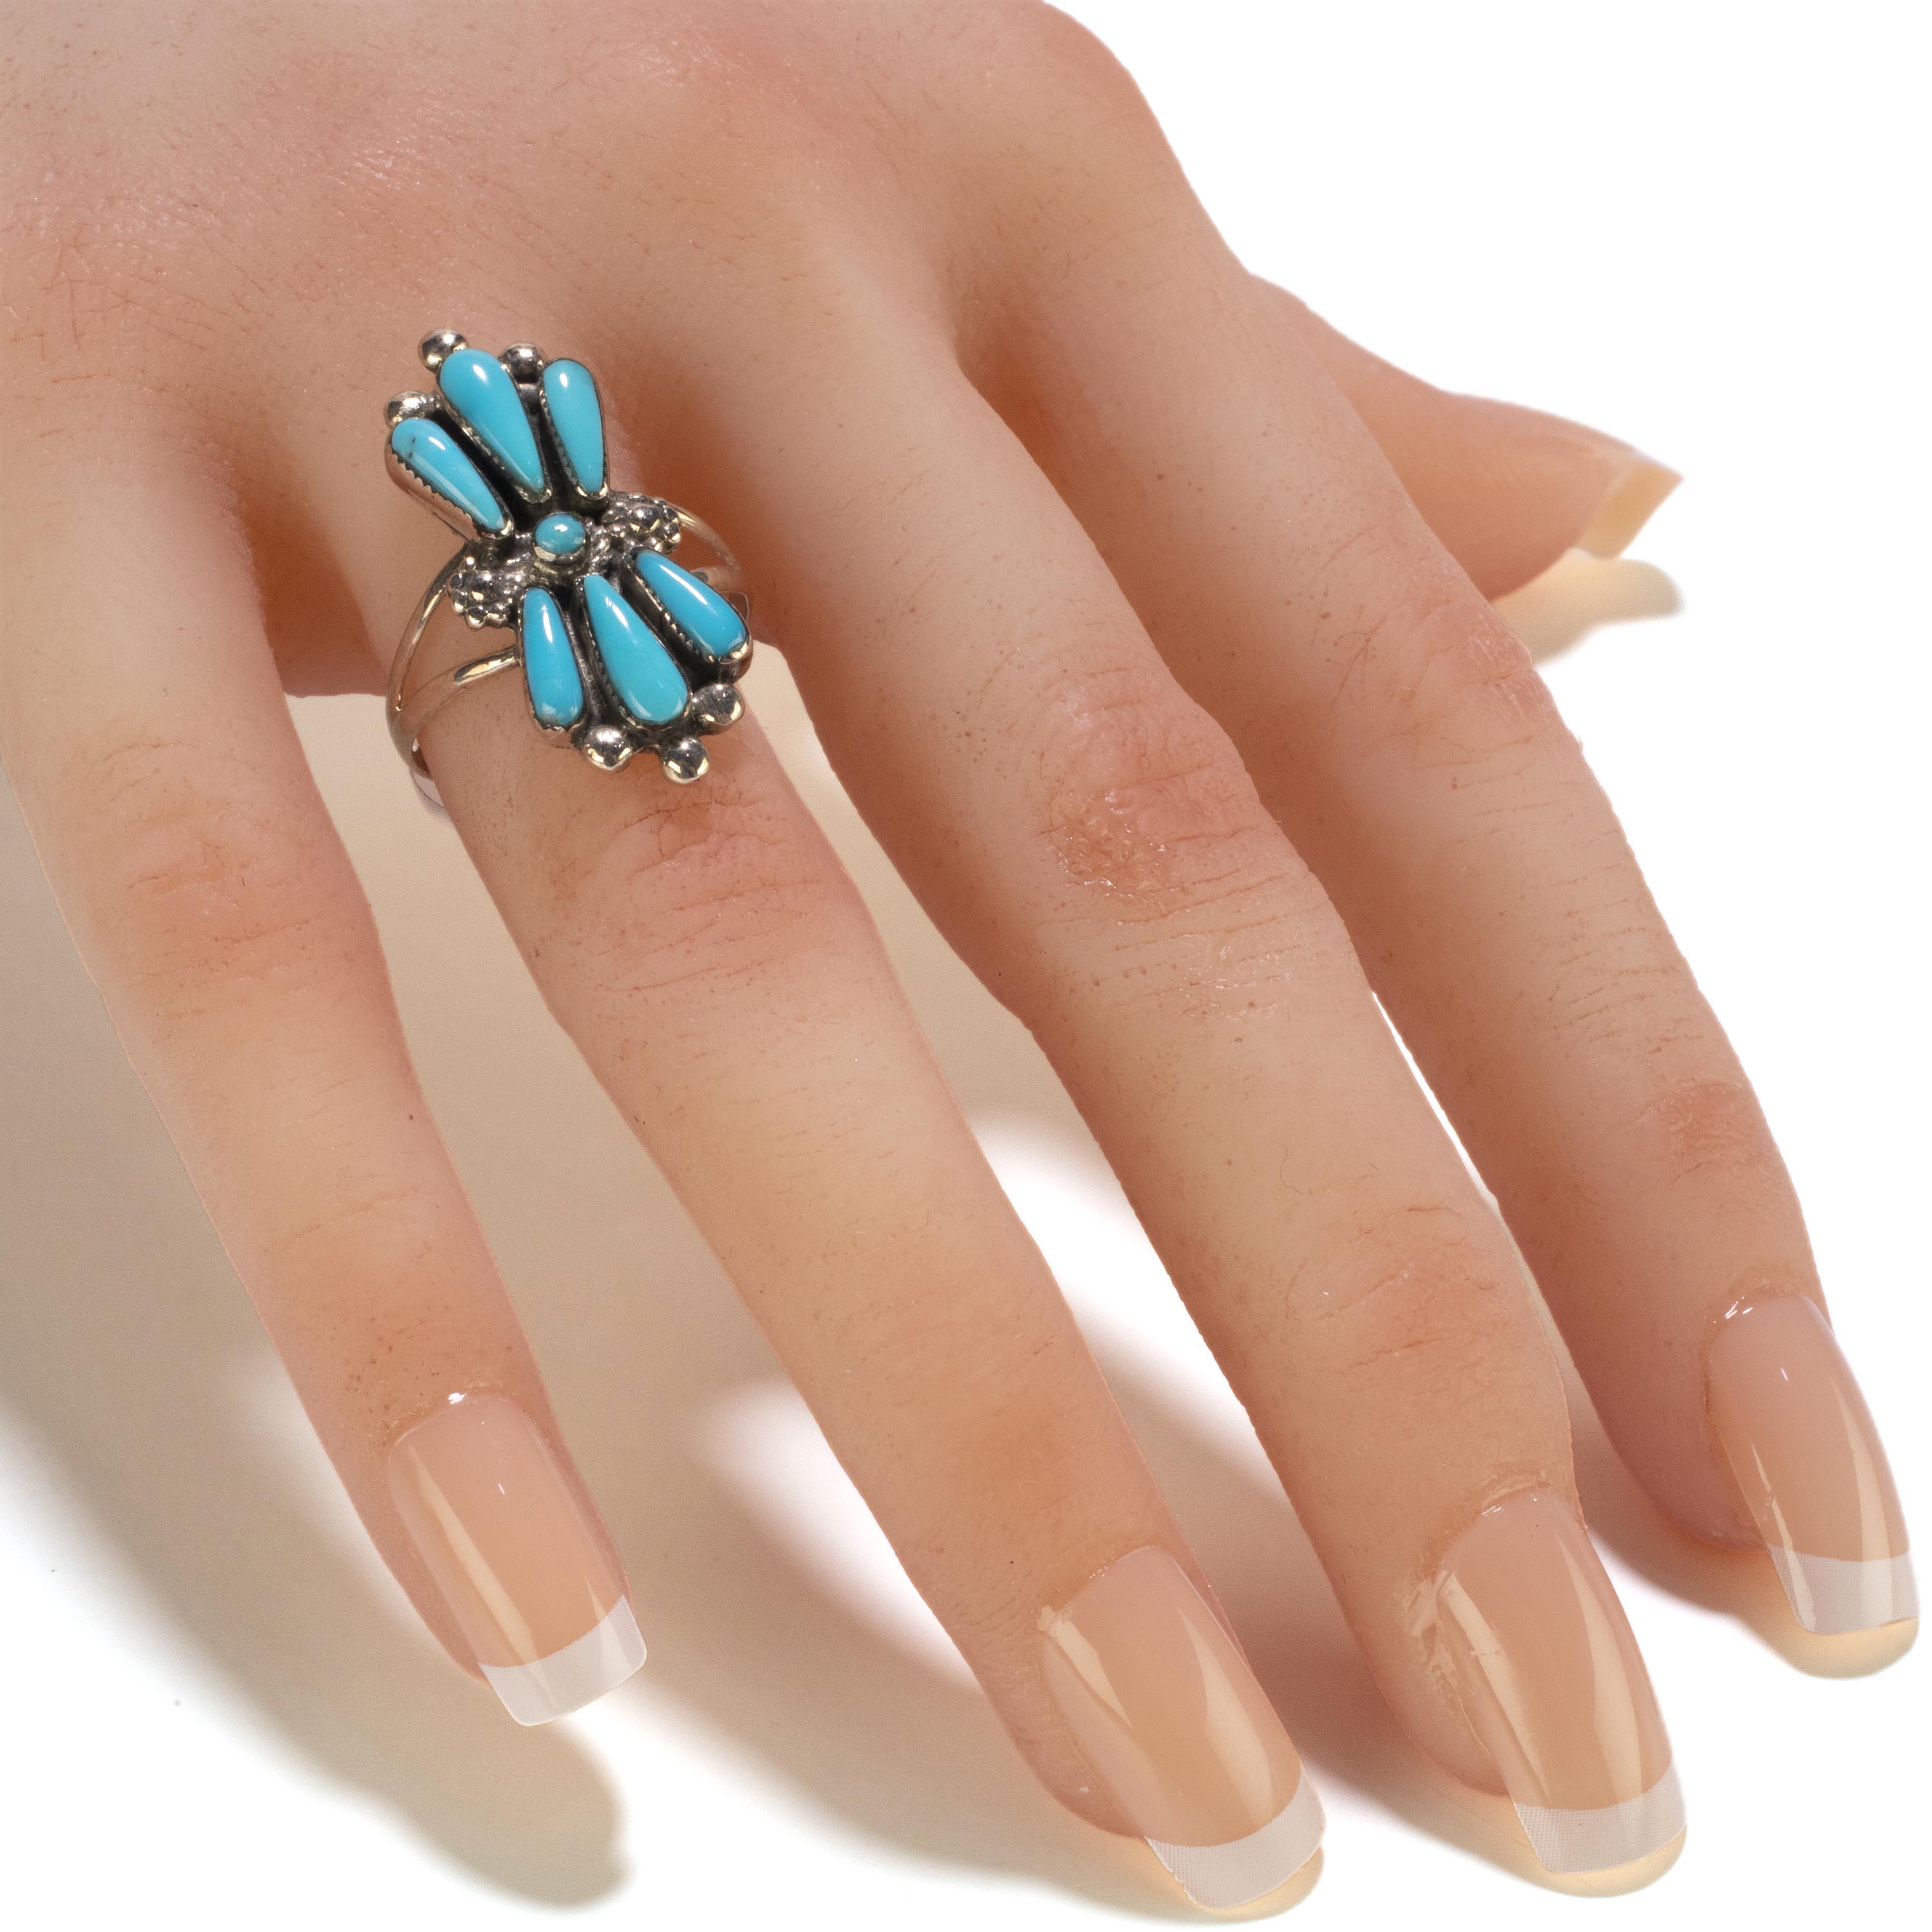 Kalifano 8 Turquoise Butterfly Handmade 925 Sterling Silver Ring AKR150.001.8